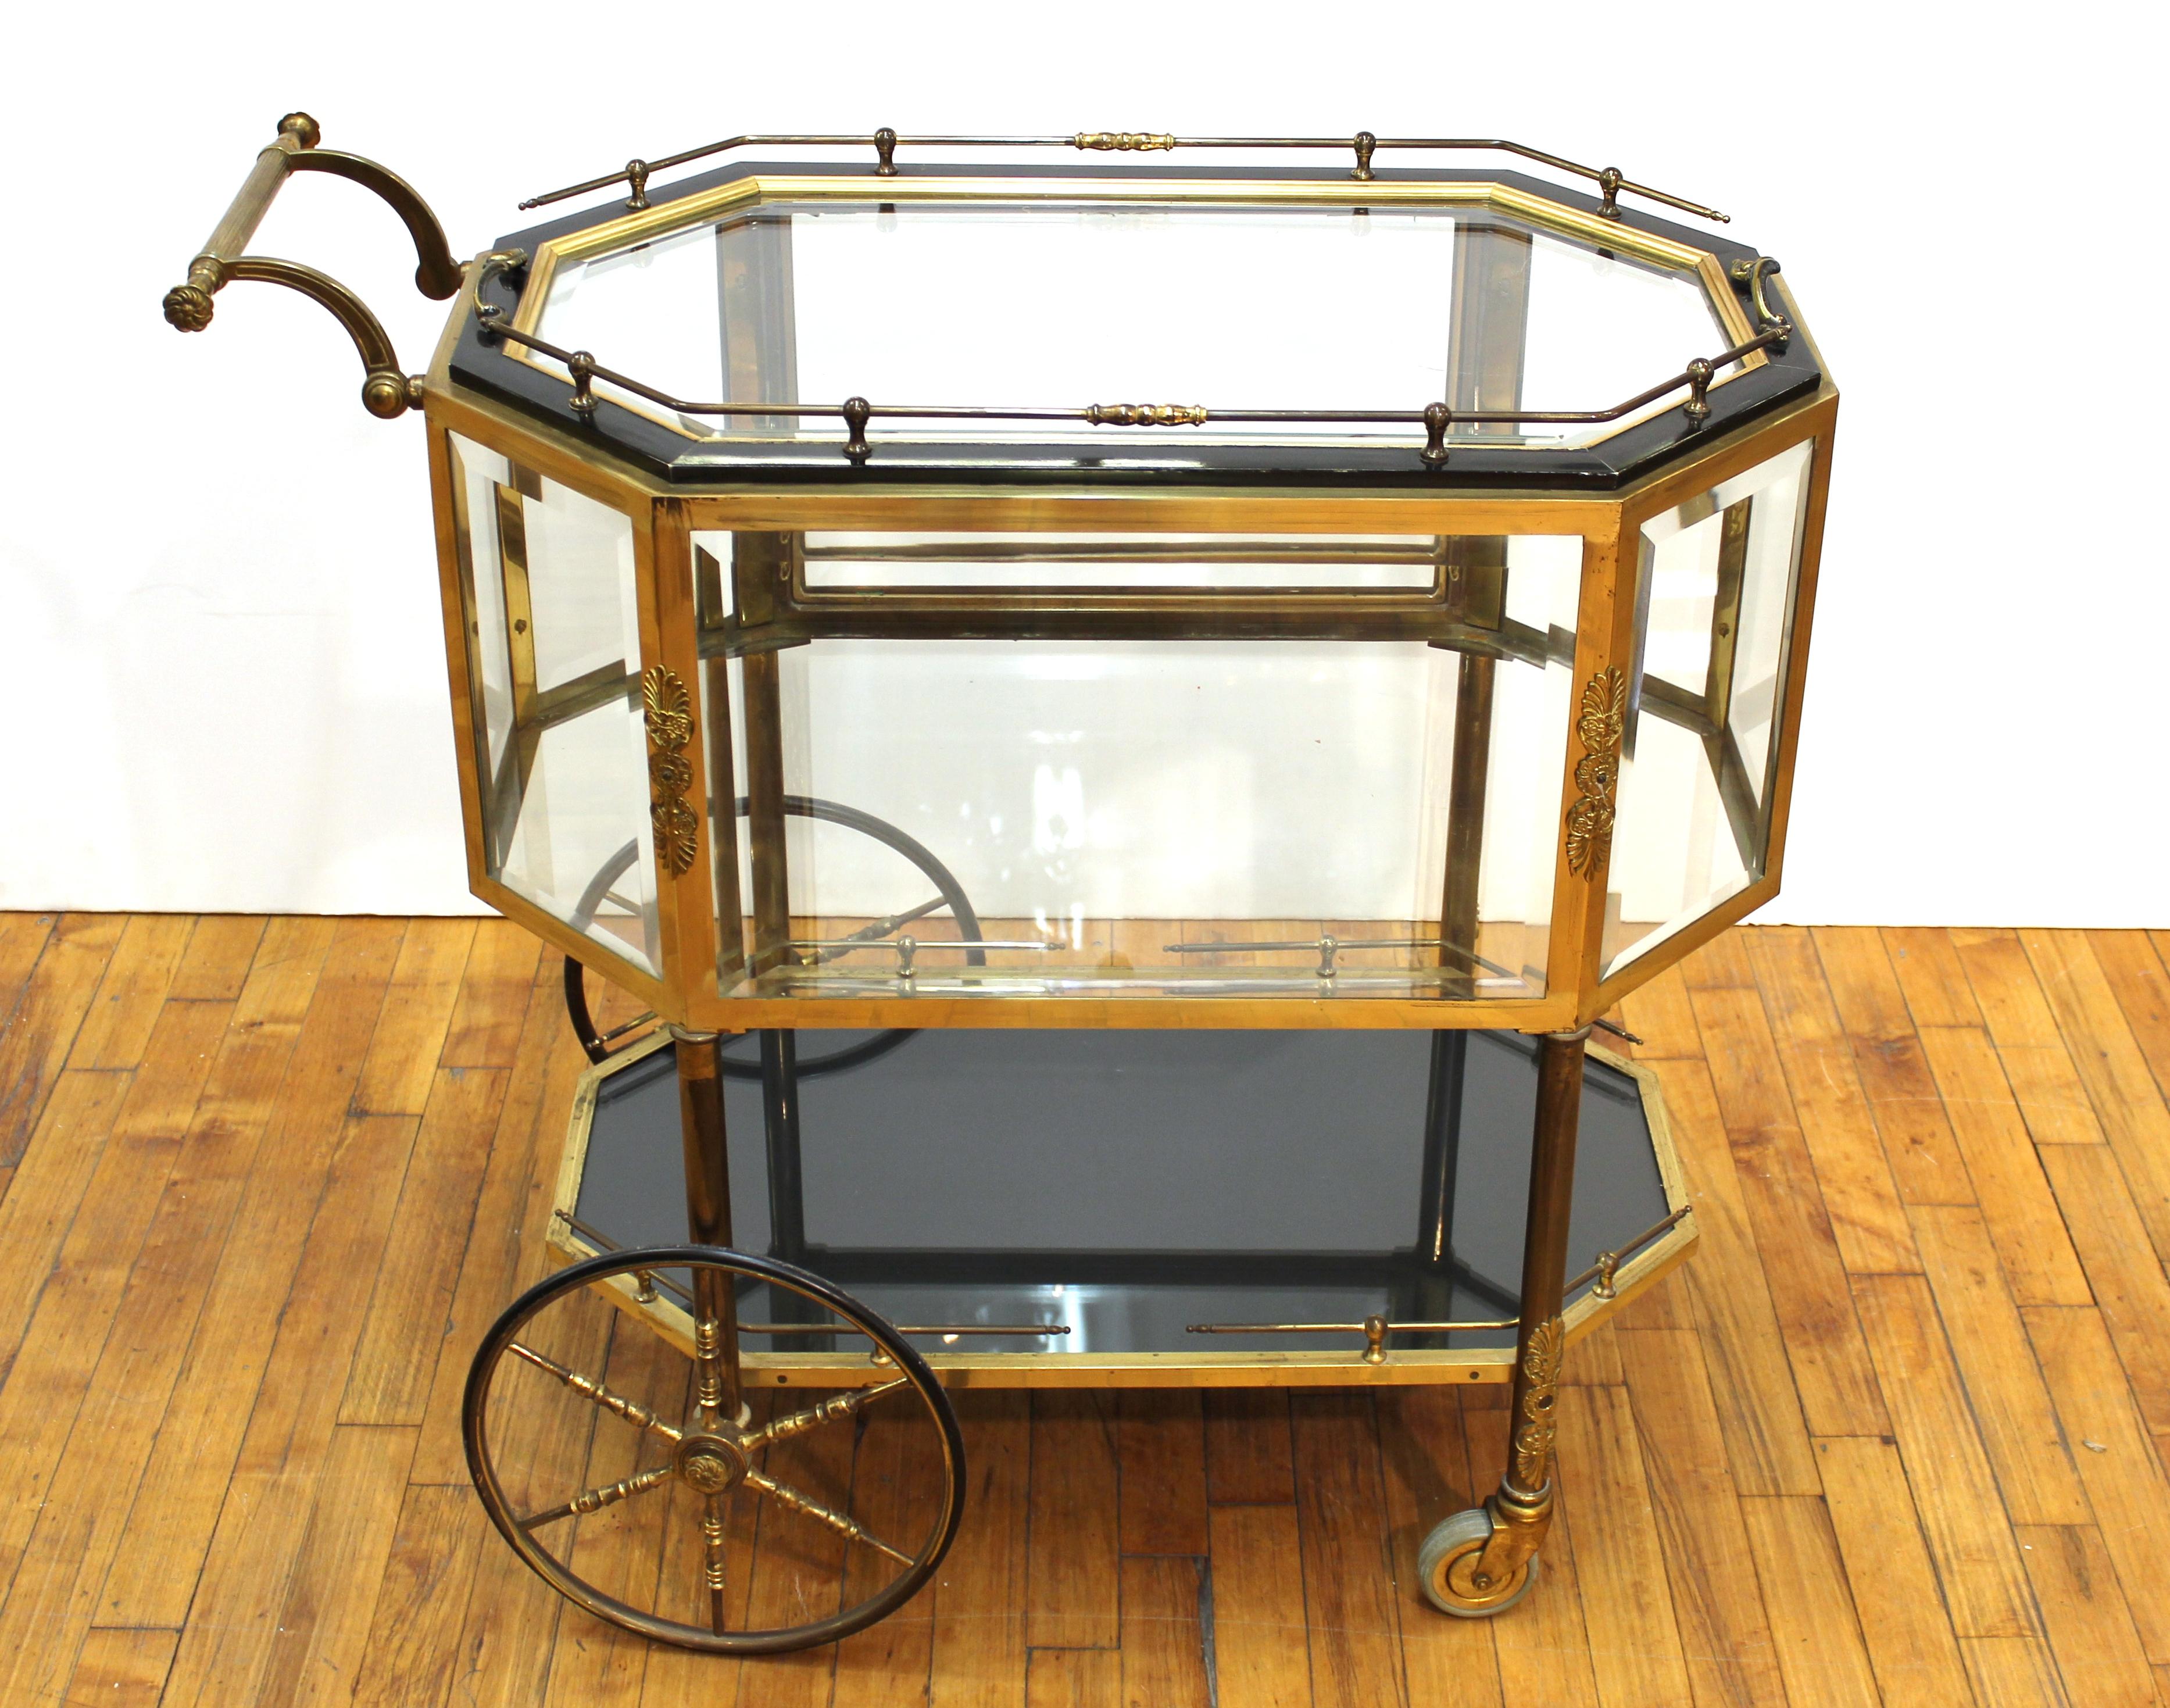 Italian Mid-Century Modern dessert or pastry cart on wheels with glass shelf closed compartment underneath and removable glass serving tray on top in black and gold. Made in Italy during the 1950's, in very good vintage condition.